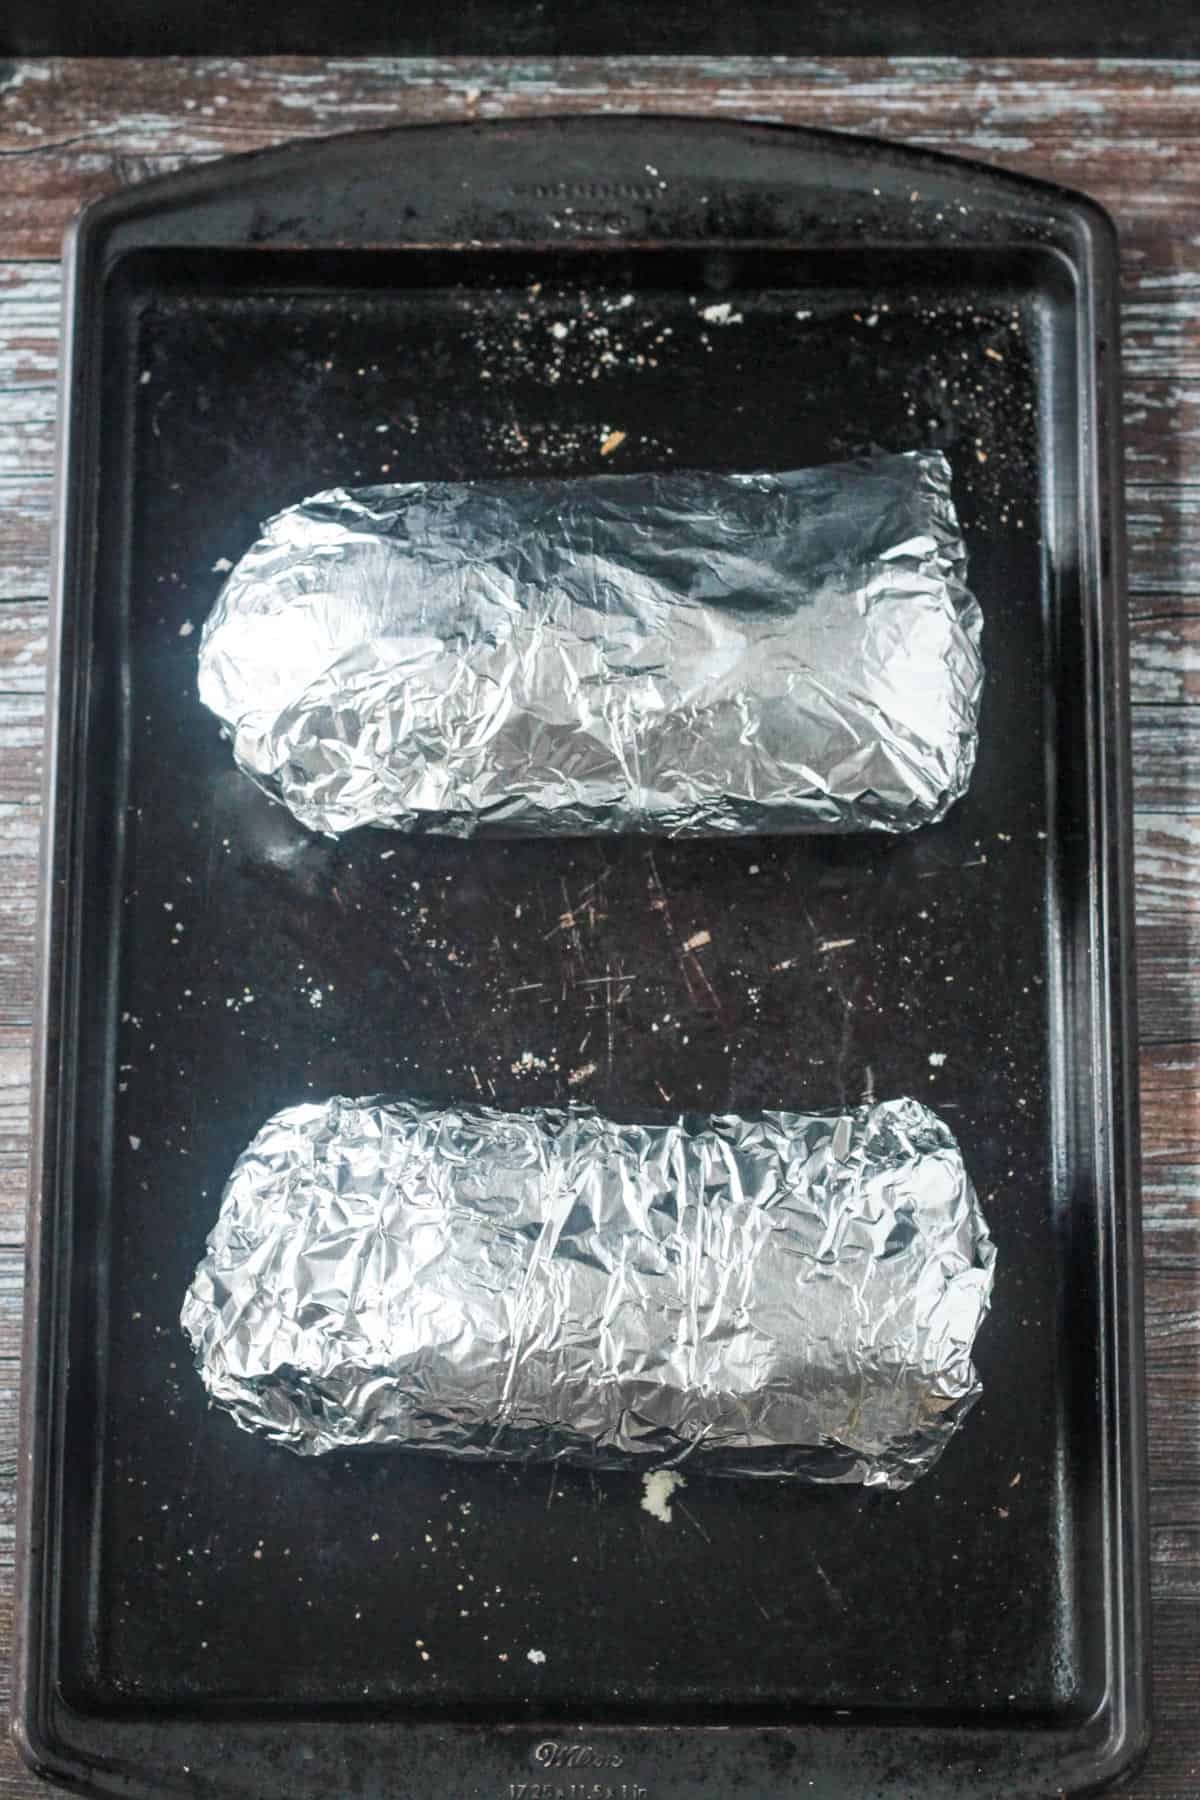 2 halves of a pre-baked garlic bread loaf wrapped in foil.